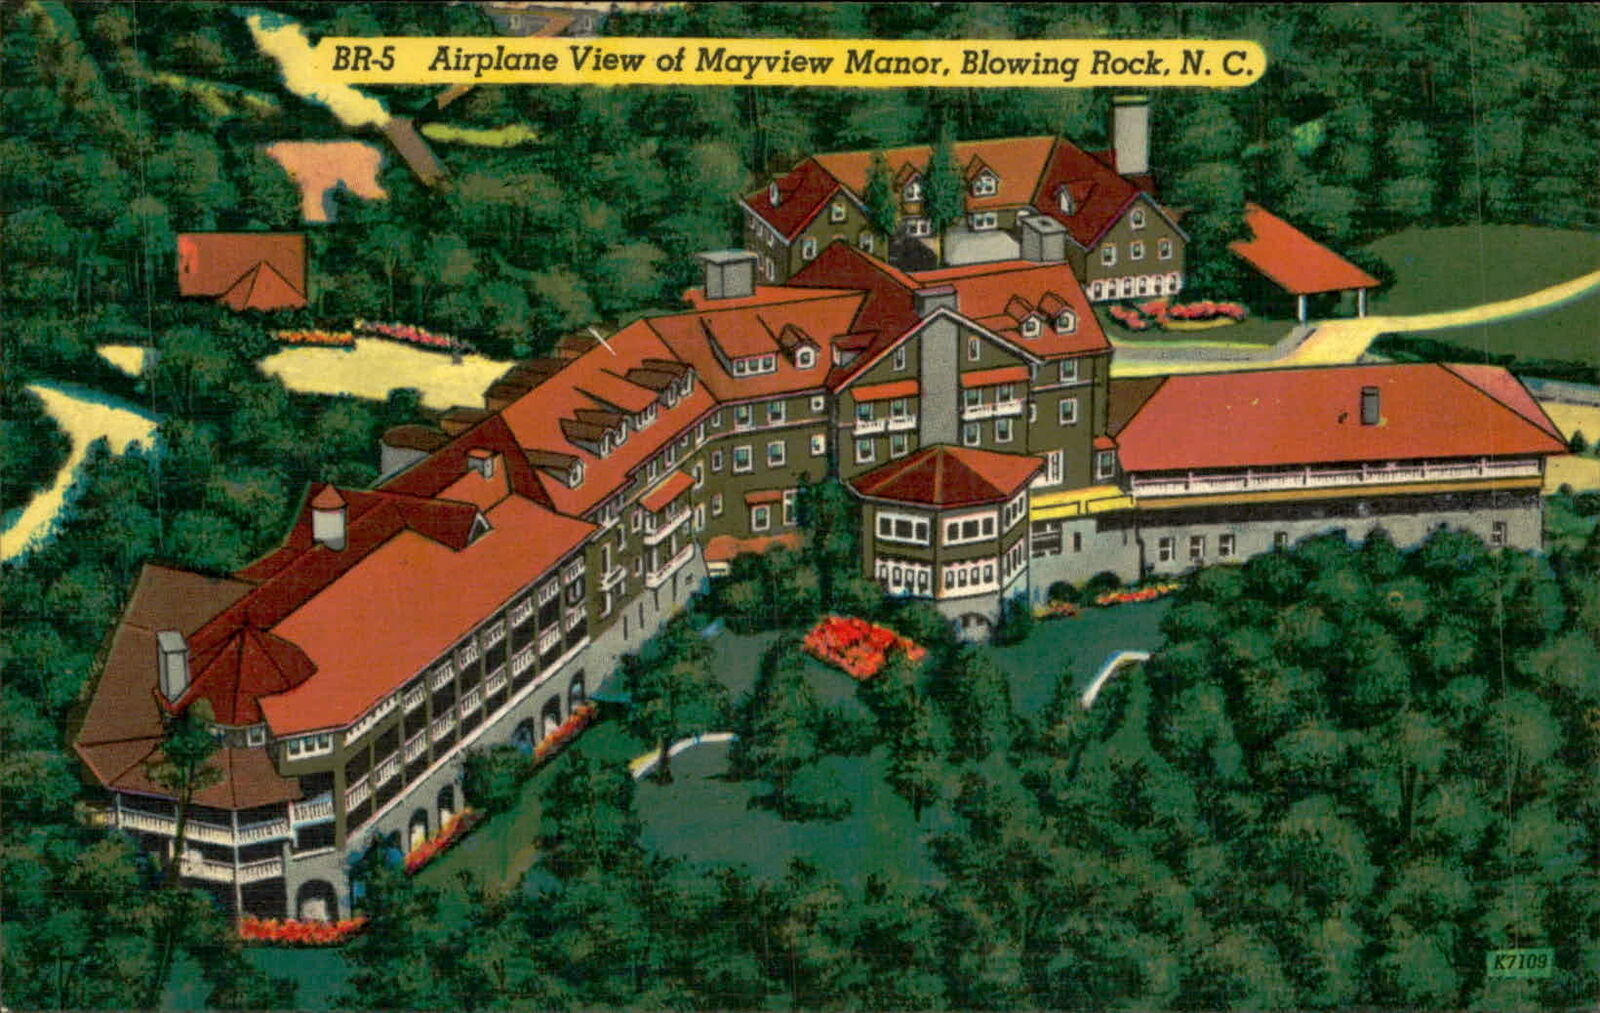 Postcard: BR-5 Airplane View of Mayview Manor, Blowing Rock, N. C. BUL